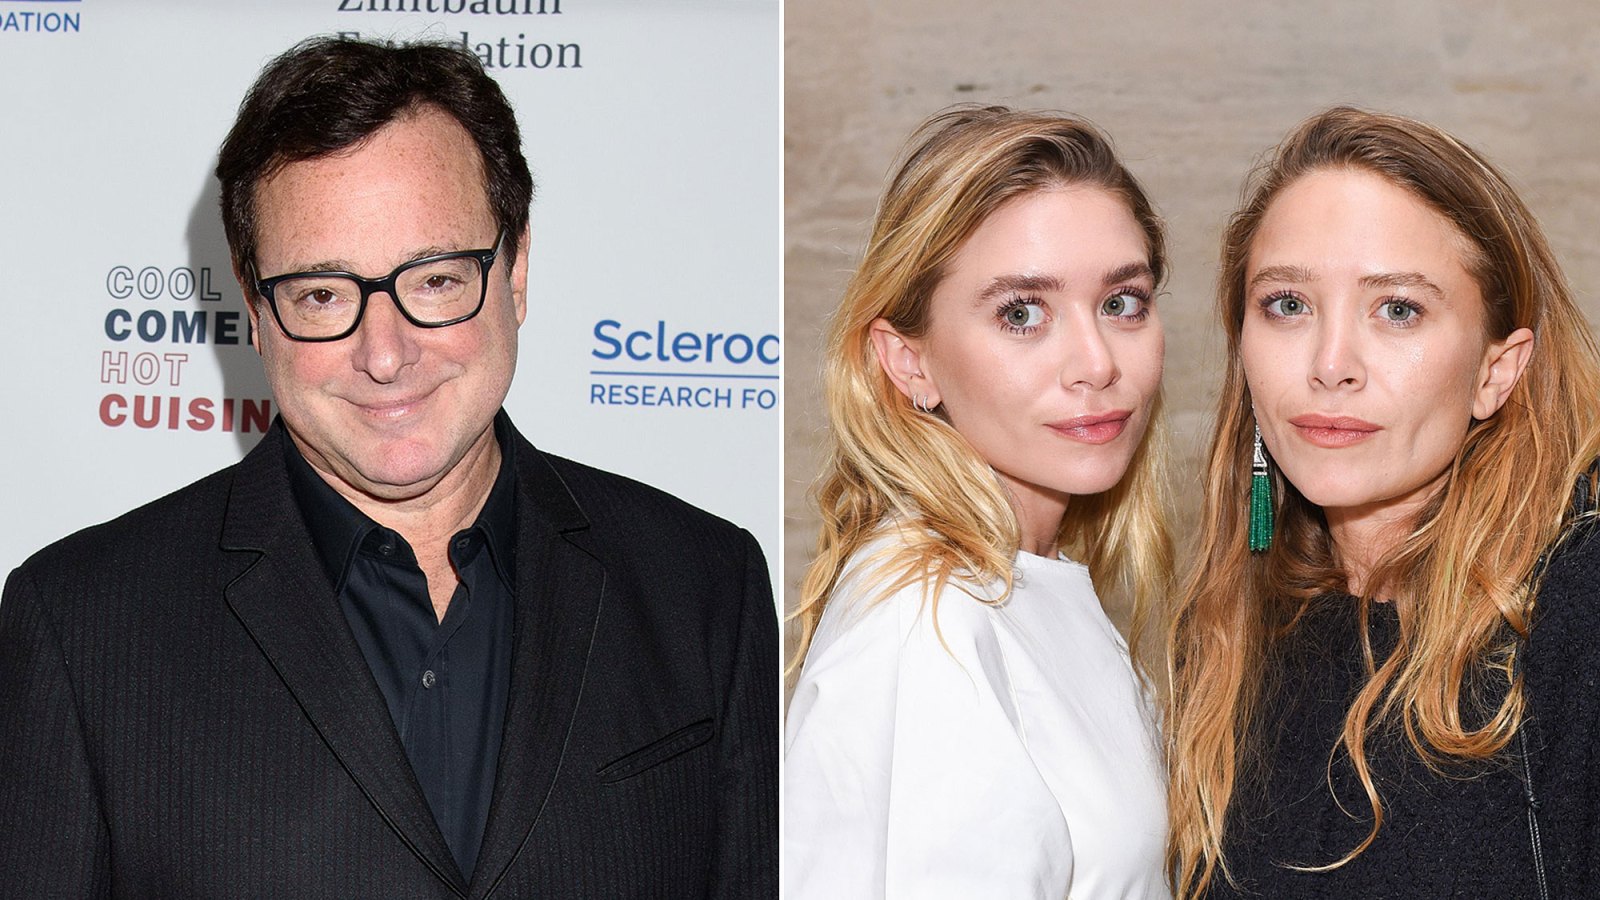 Bob Saget Says He Is 'Very Close Emotionally' to Mary-Kate and Ashley Olsen